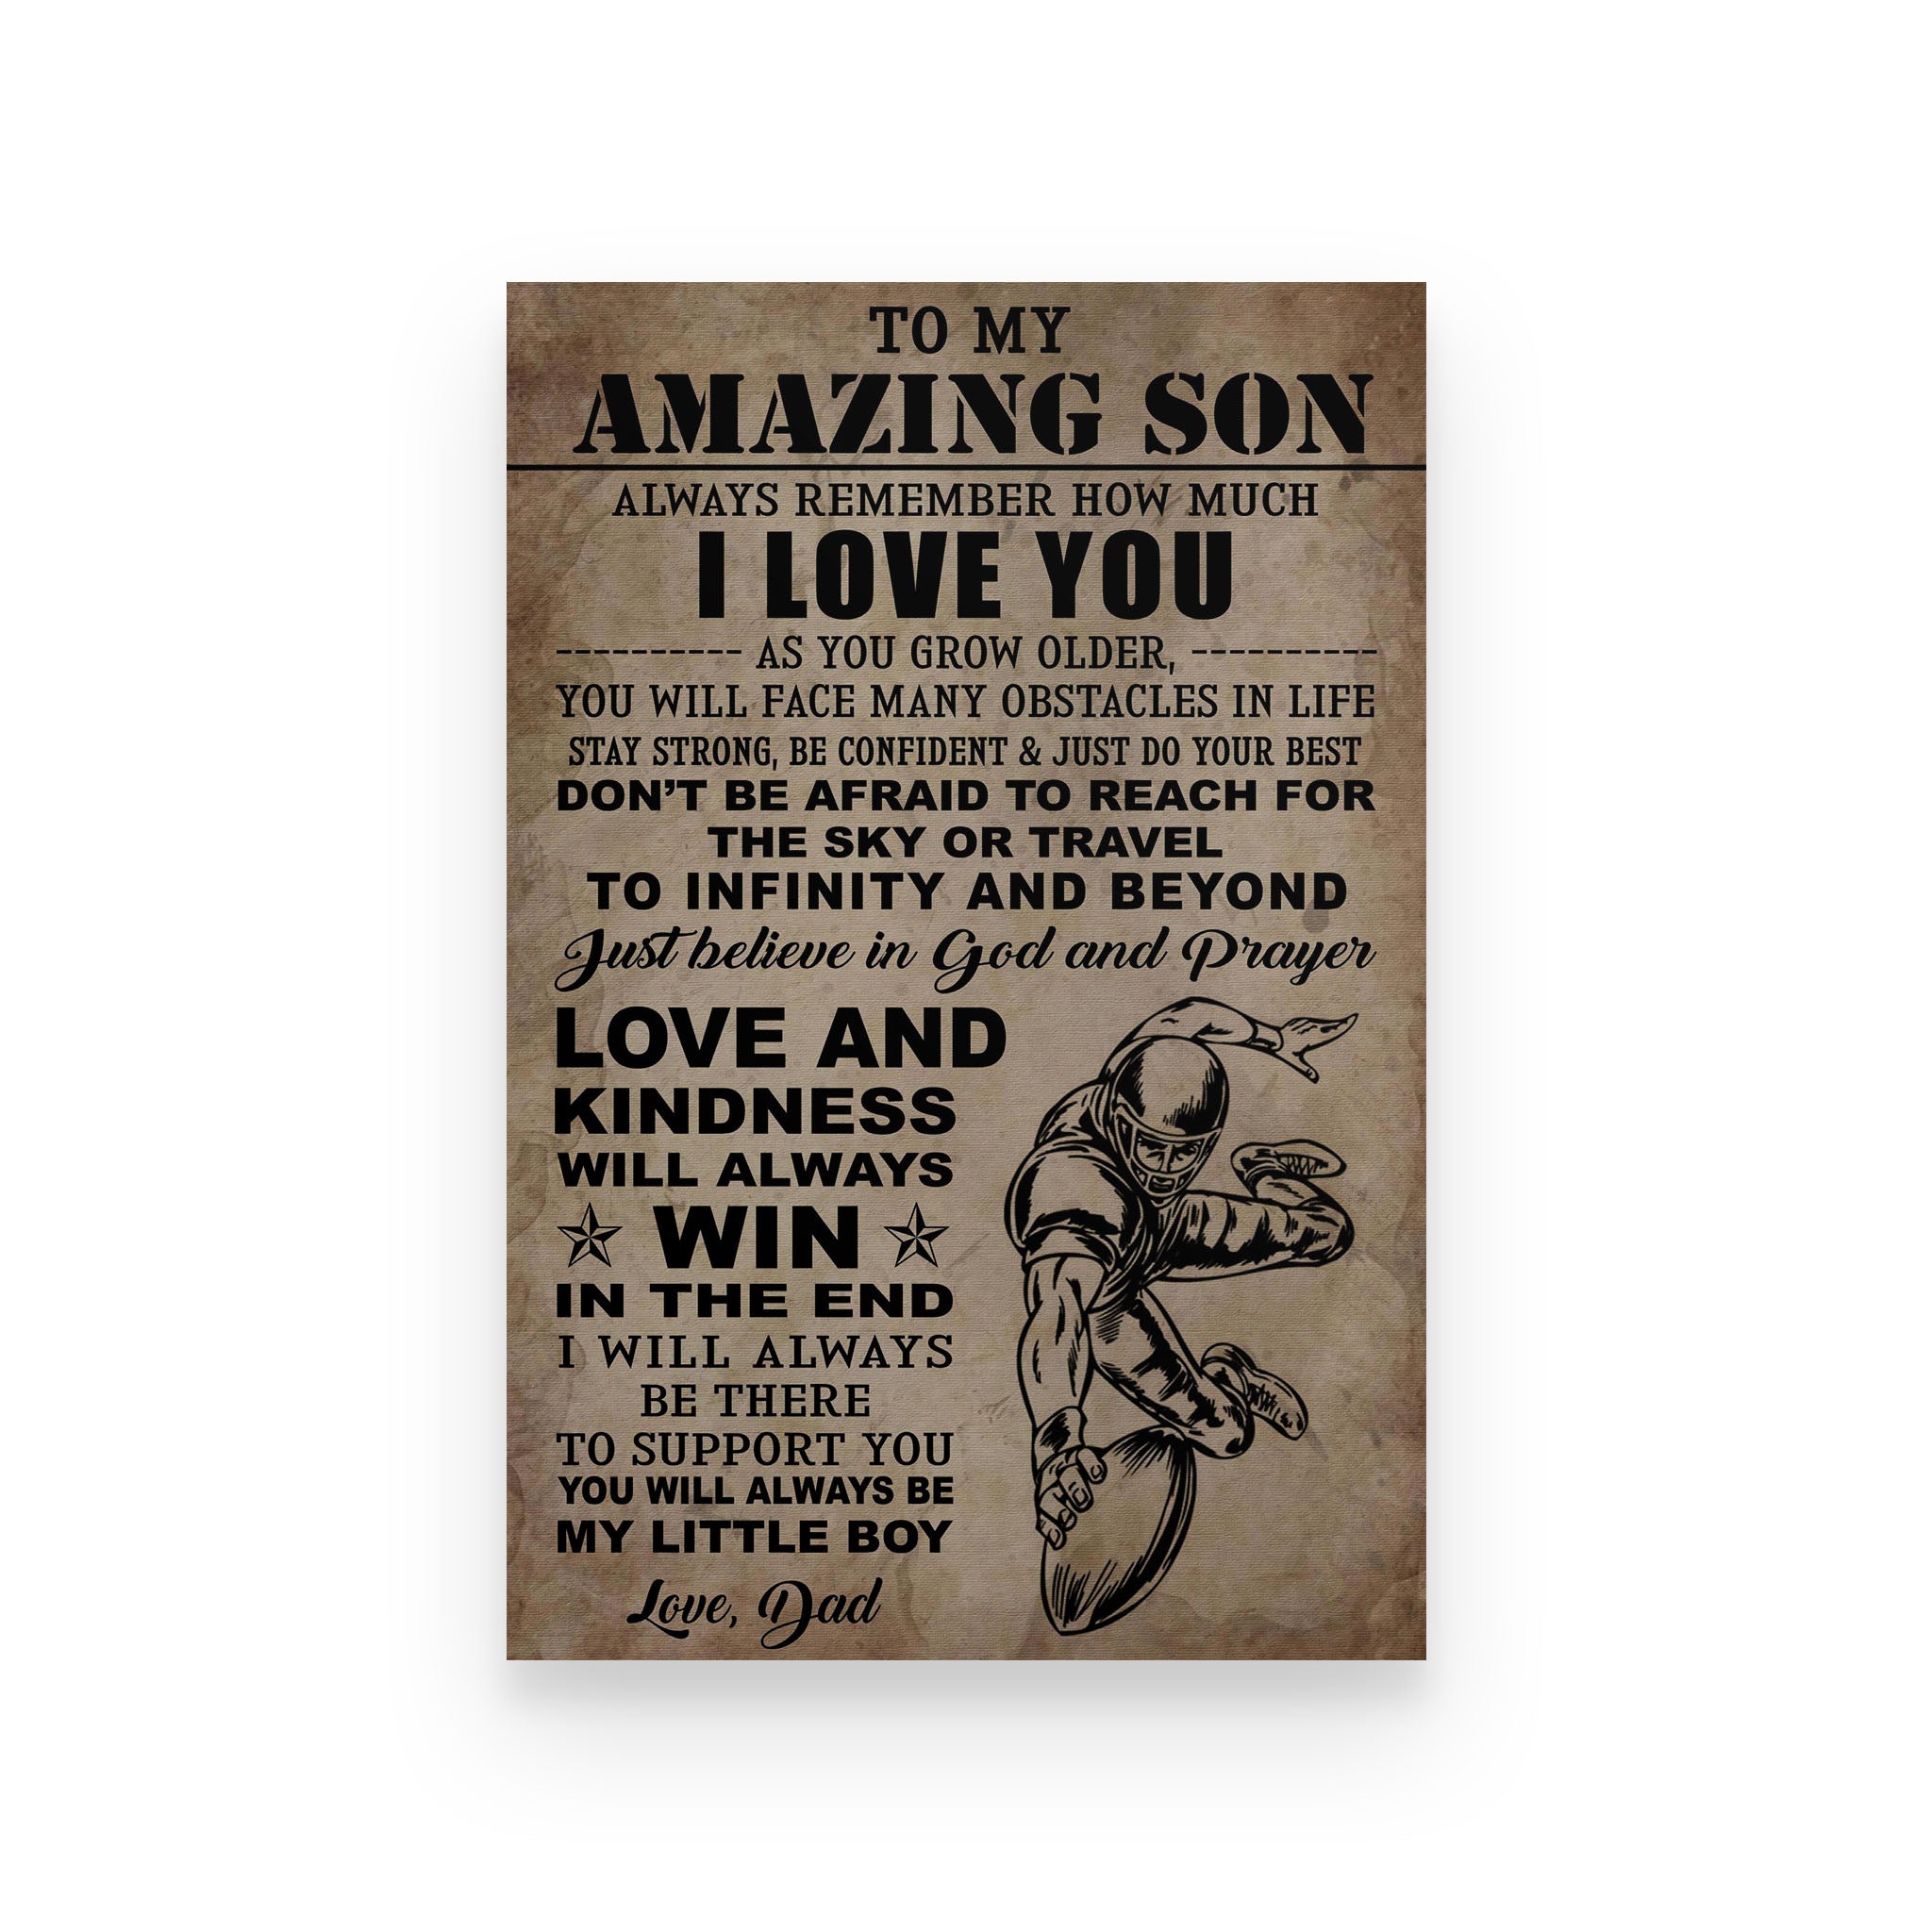 American football poster dad to son always remember how much I love you vs2